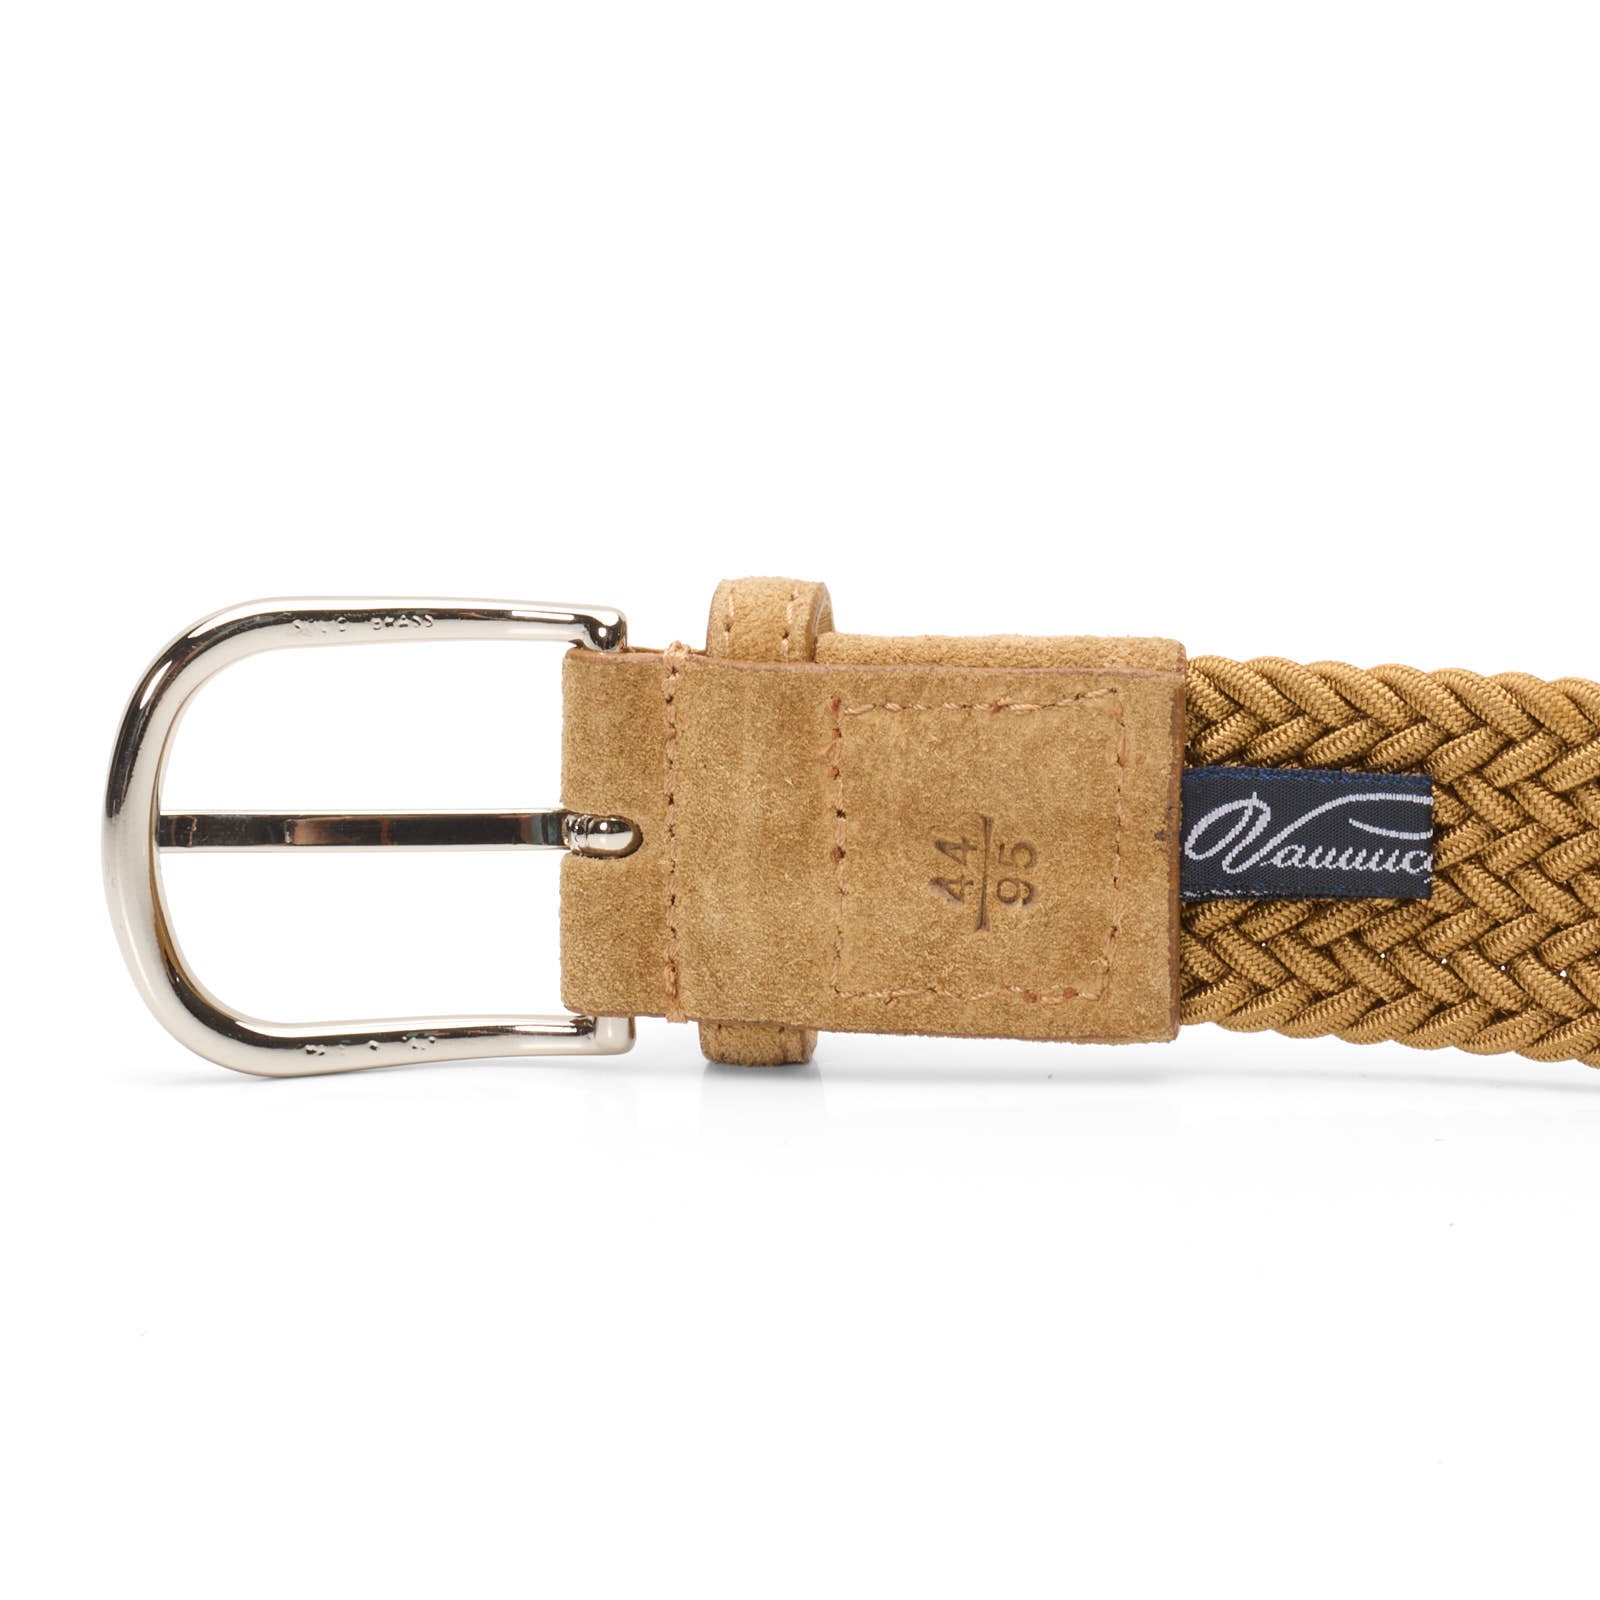 PAOLO VITALE for VANNUCCI Milano Tan Stretch Woven Braided Belt 95cm NEW 38"